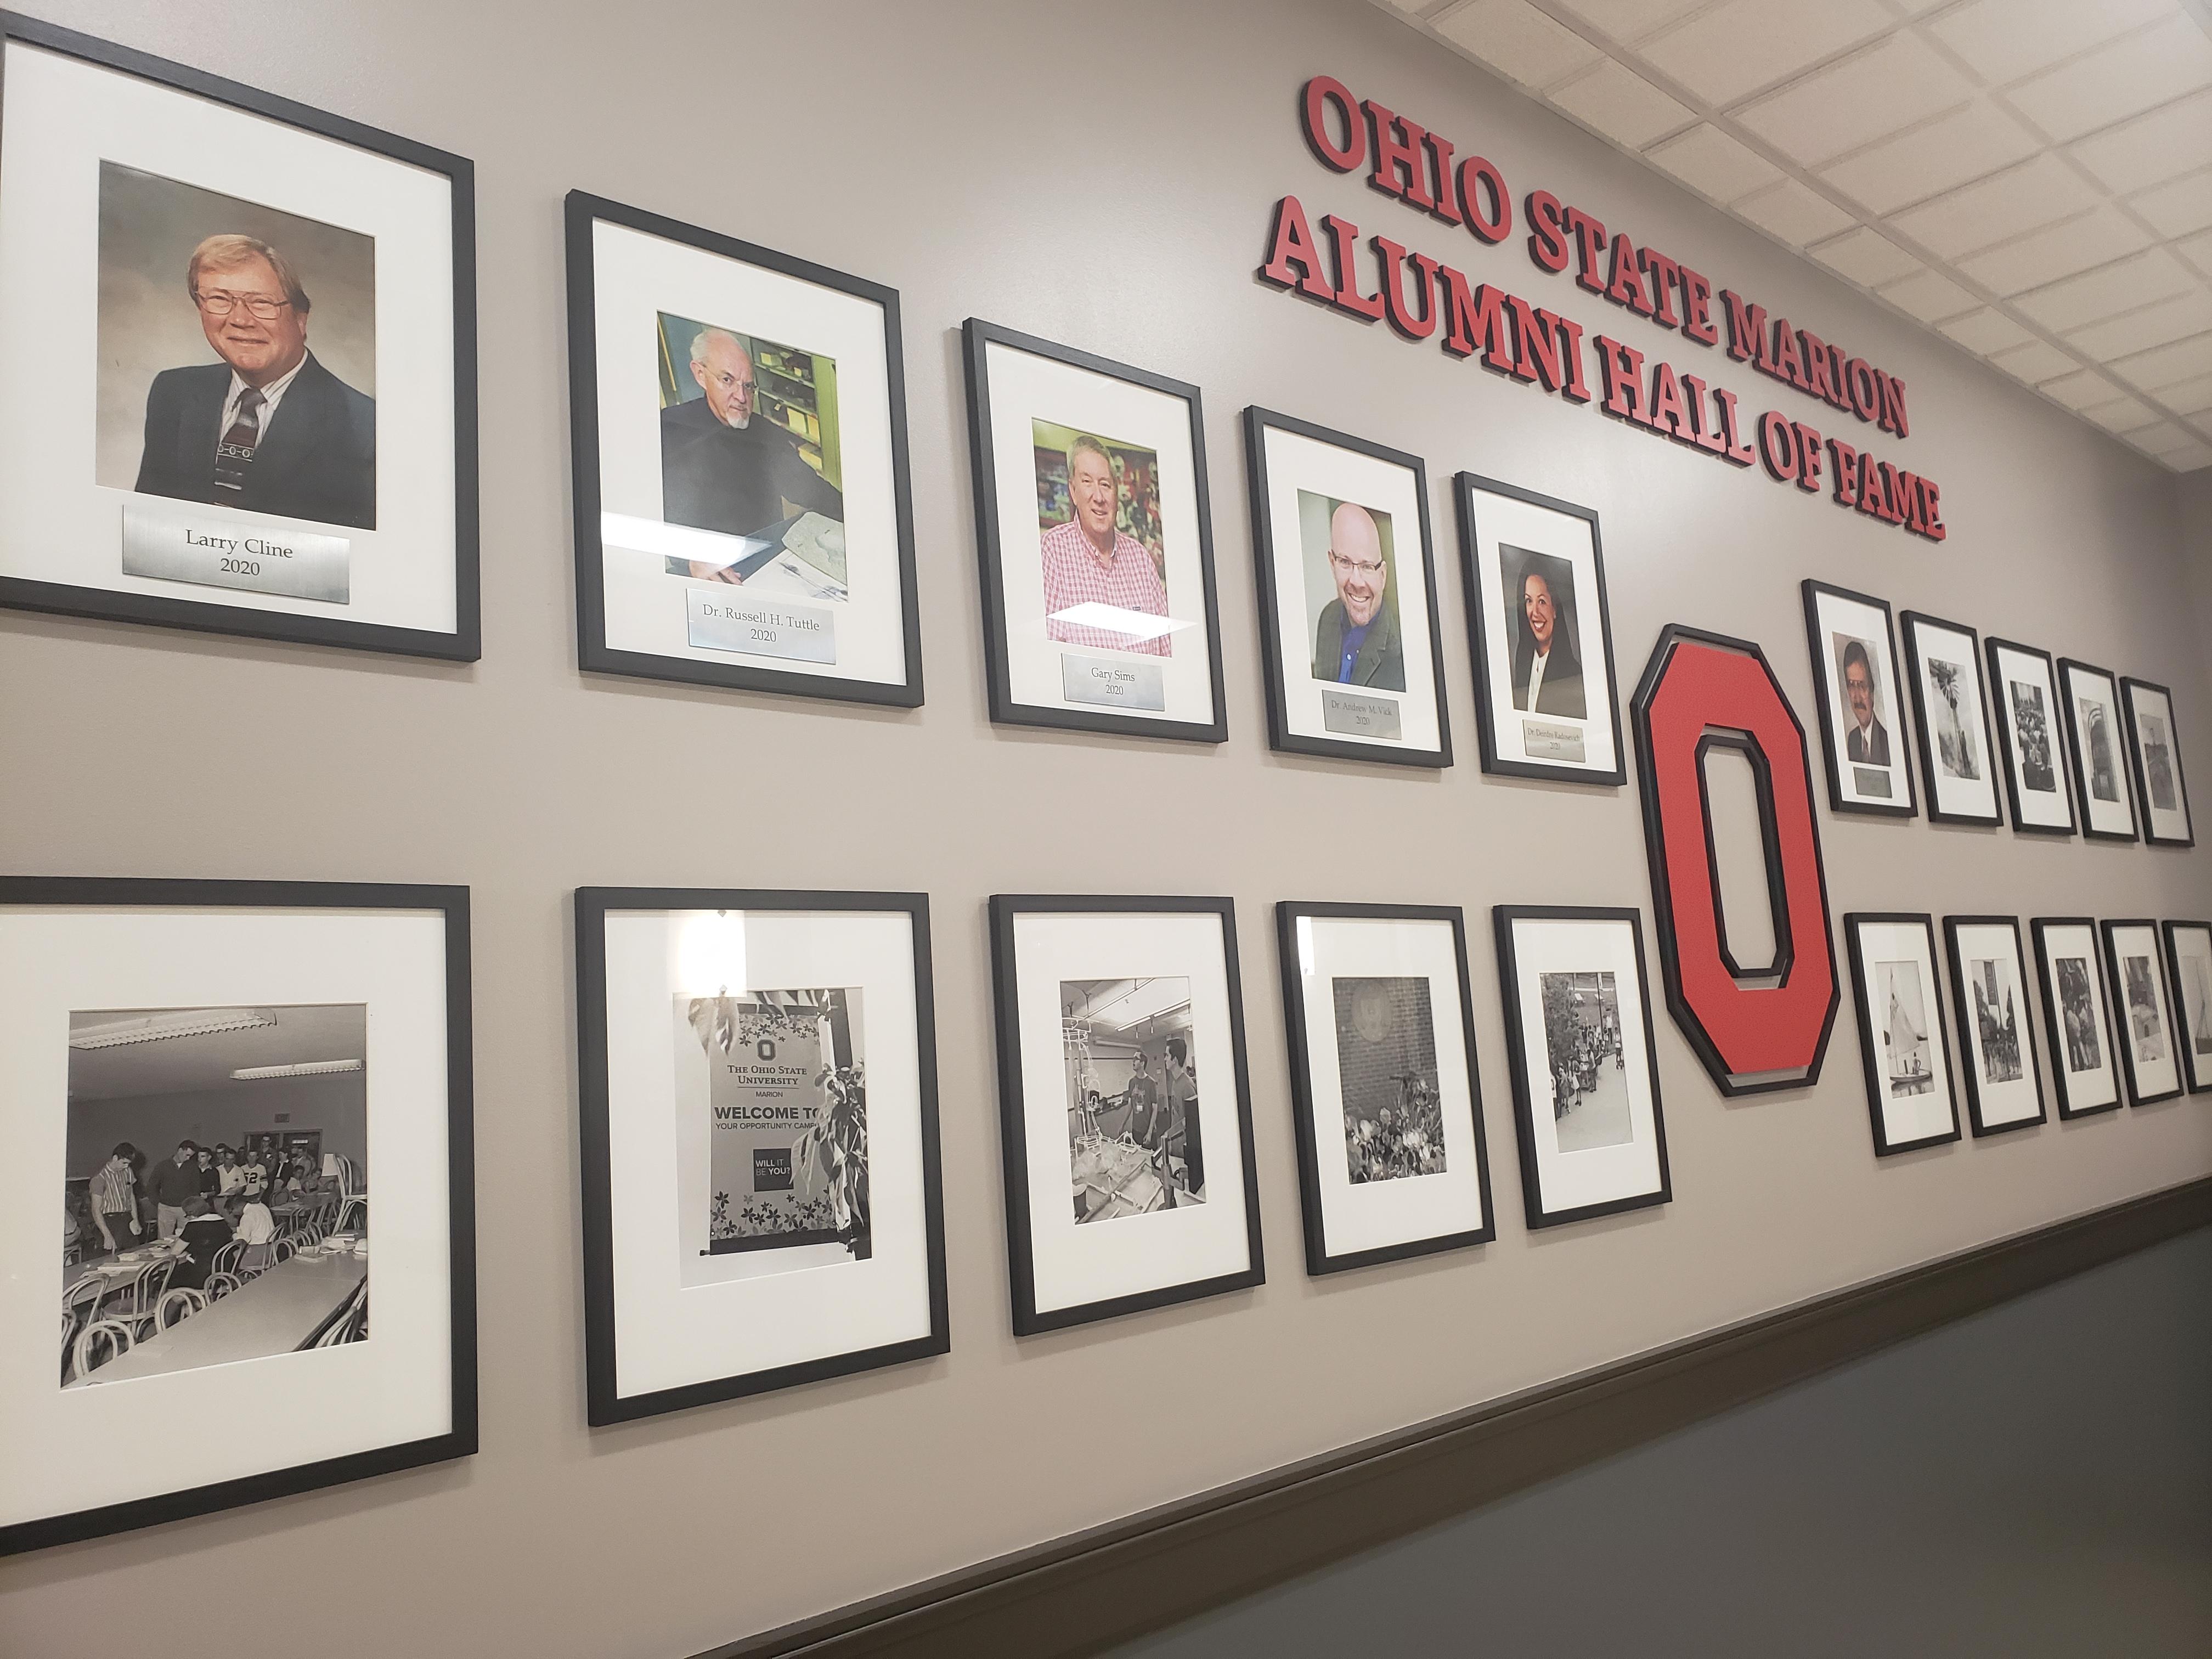 Ohio State Marion Alumni Hall of Fame wall